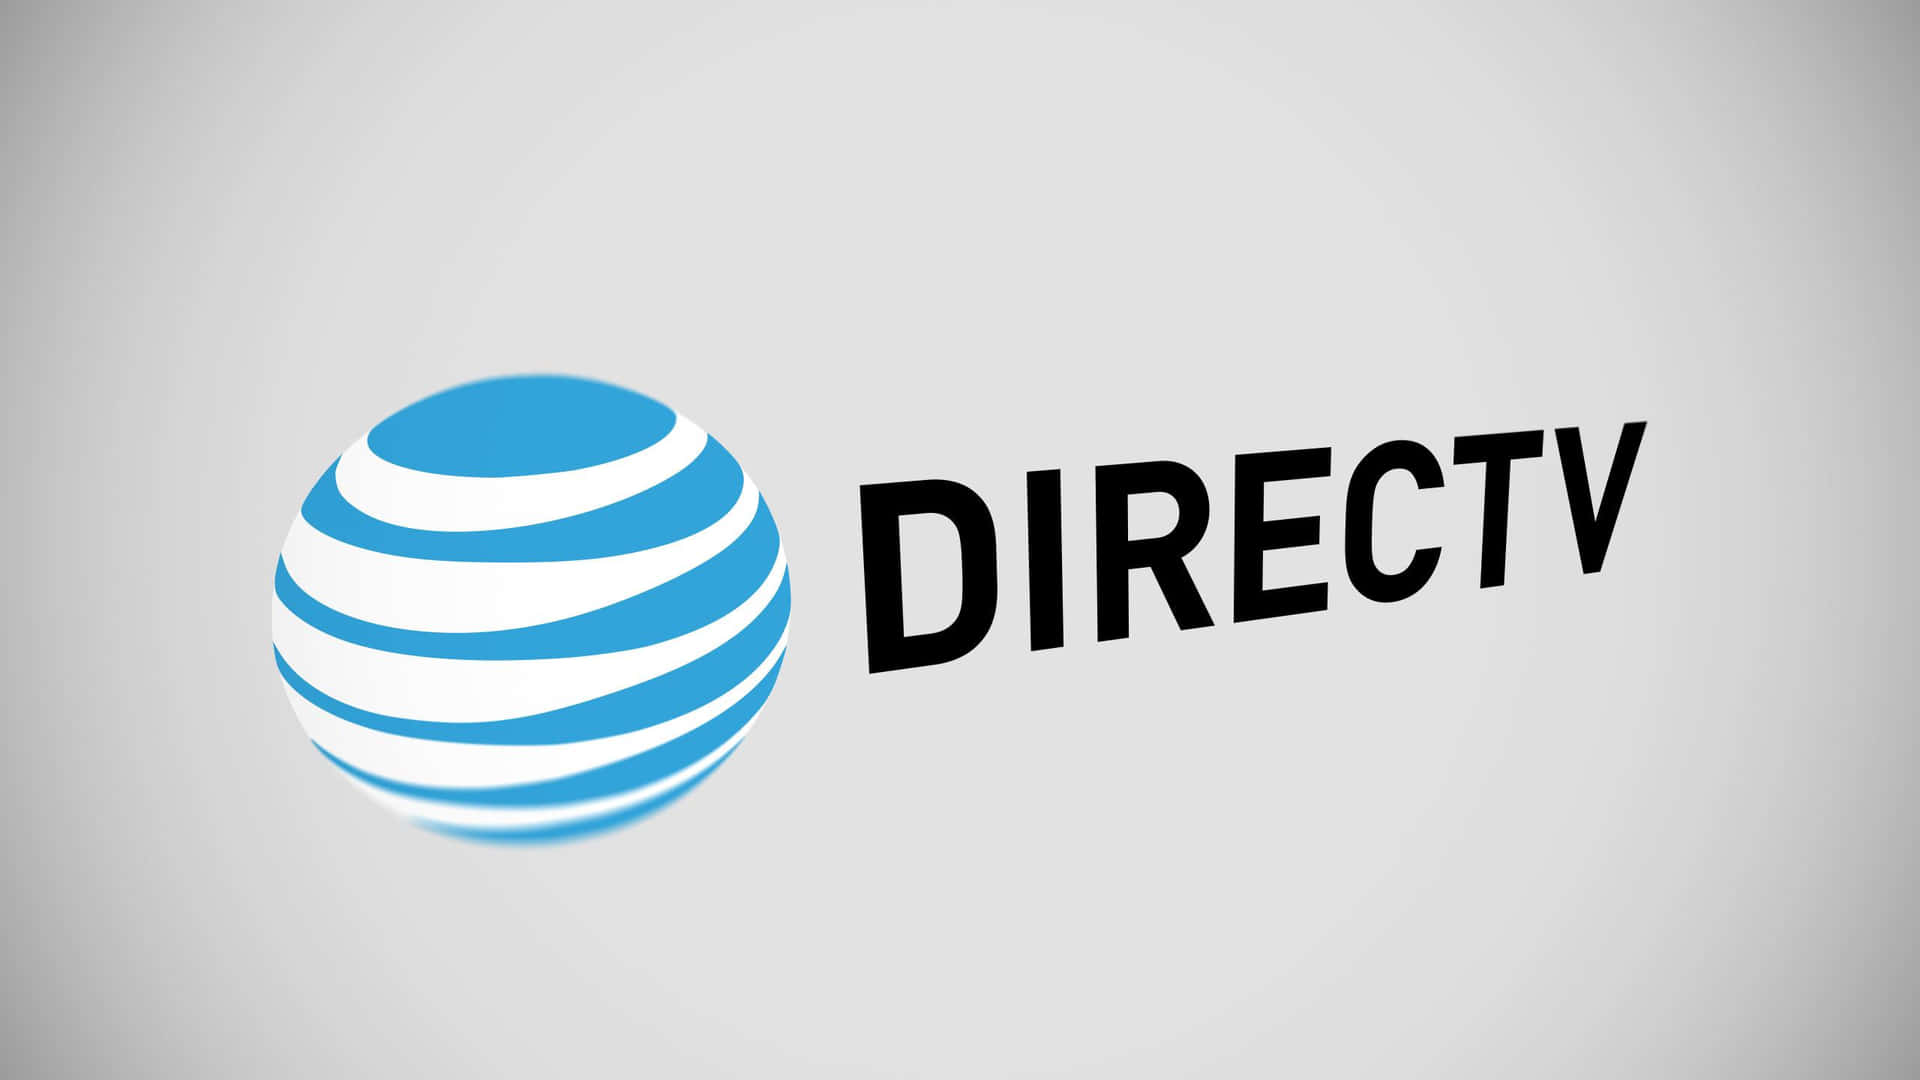 Direct Tv Logo On A Gray Background Wallpaper